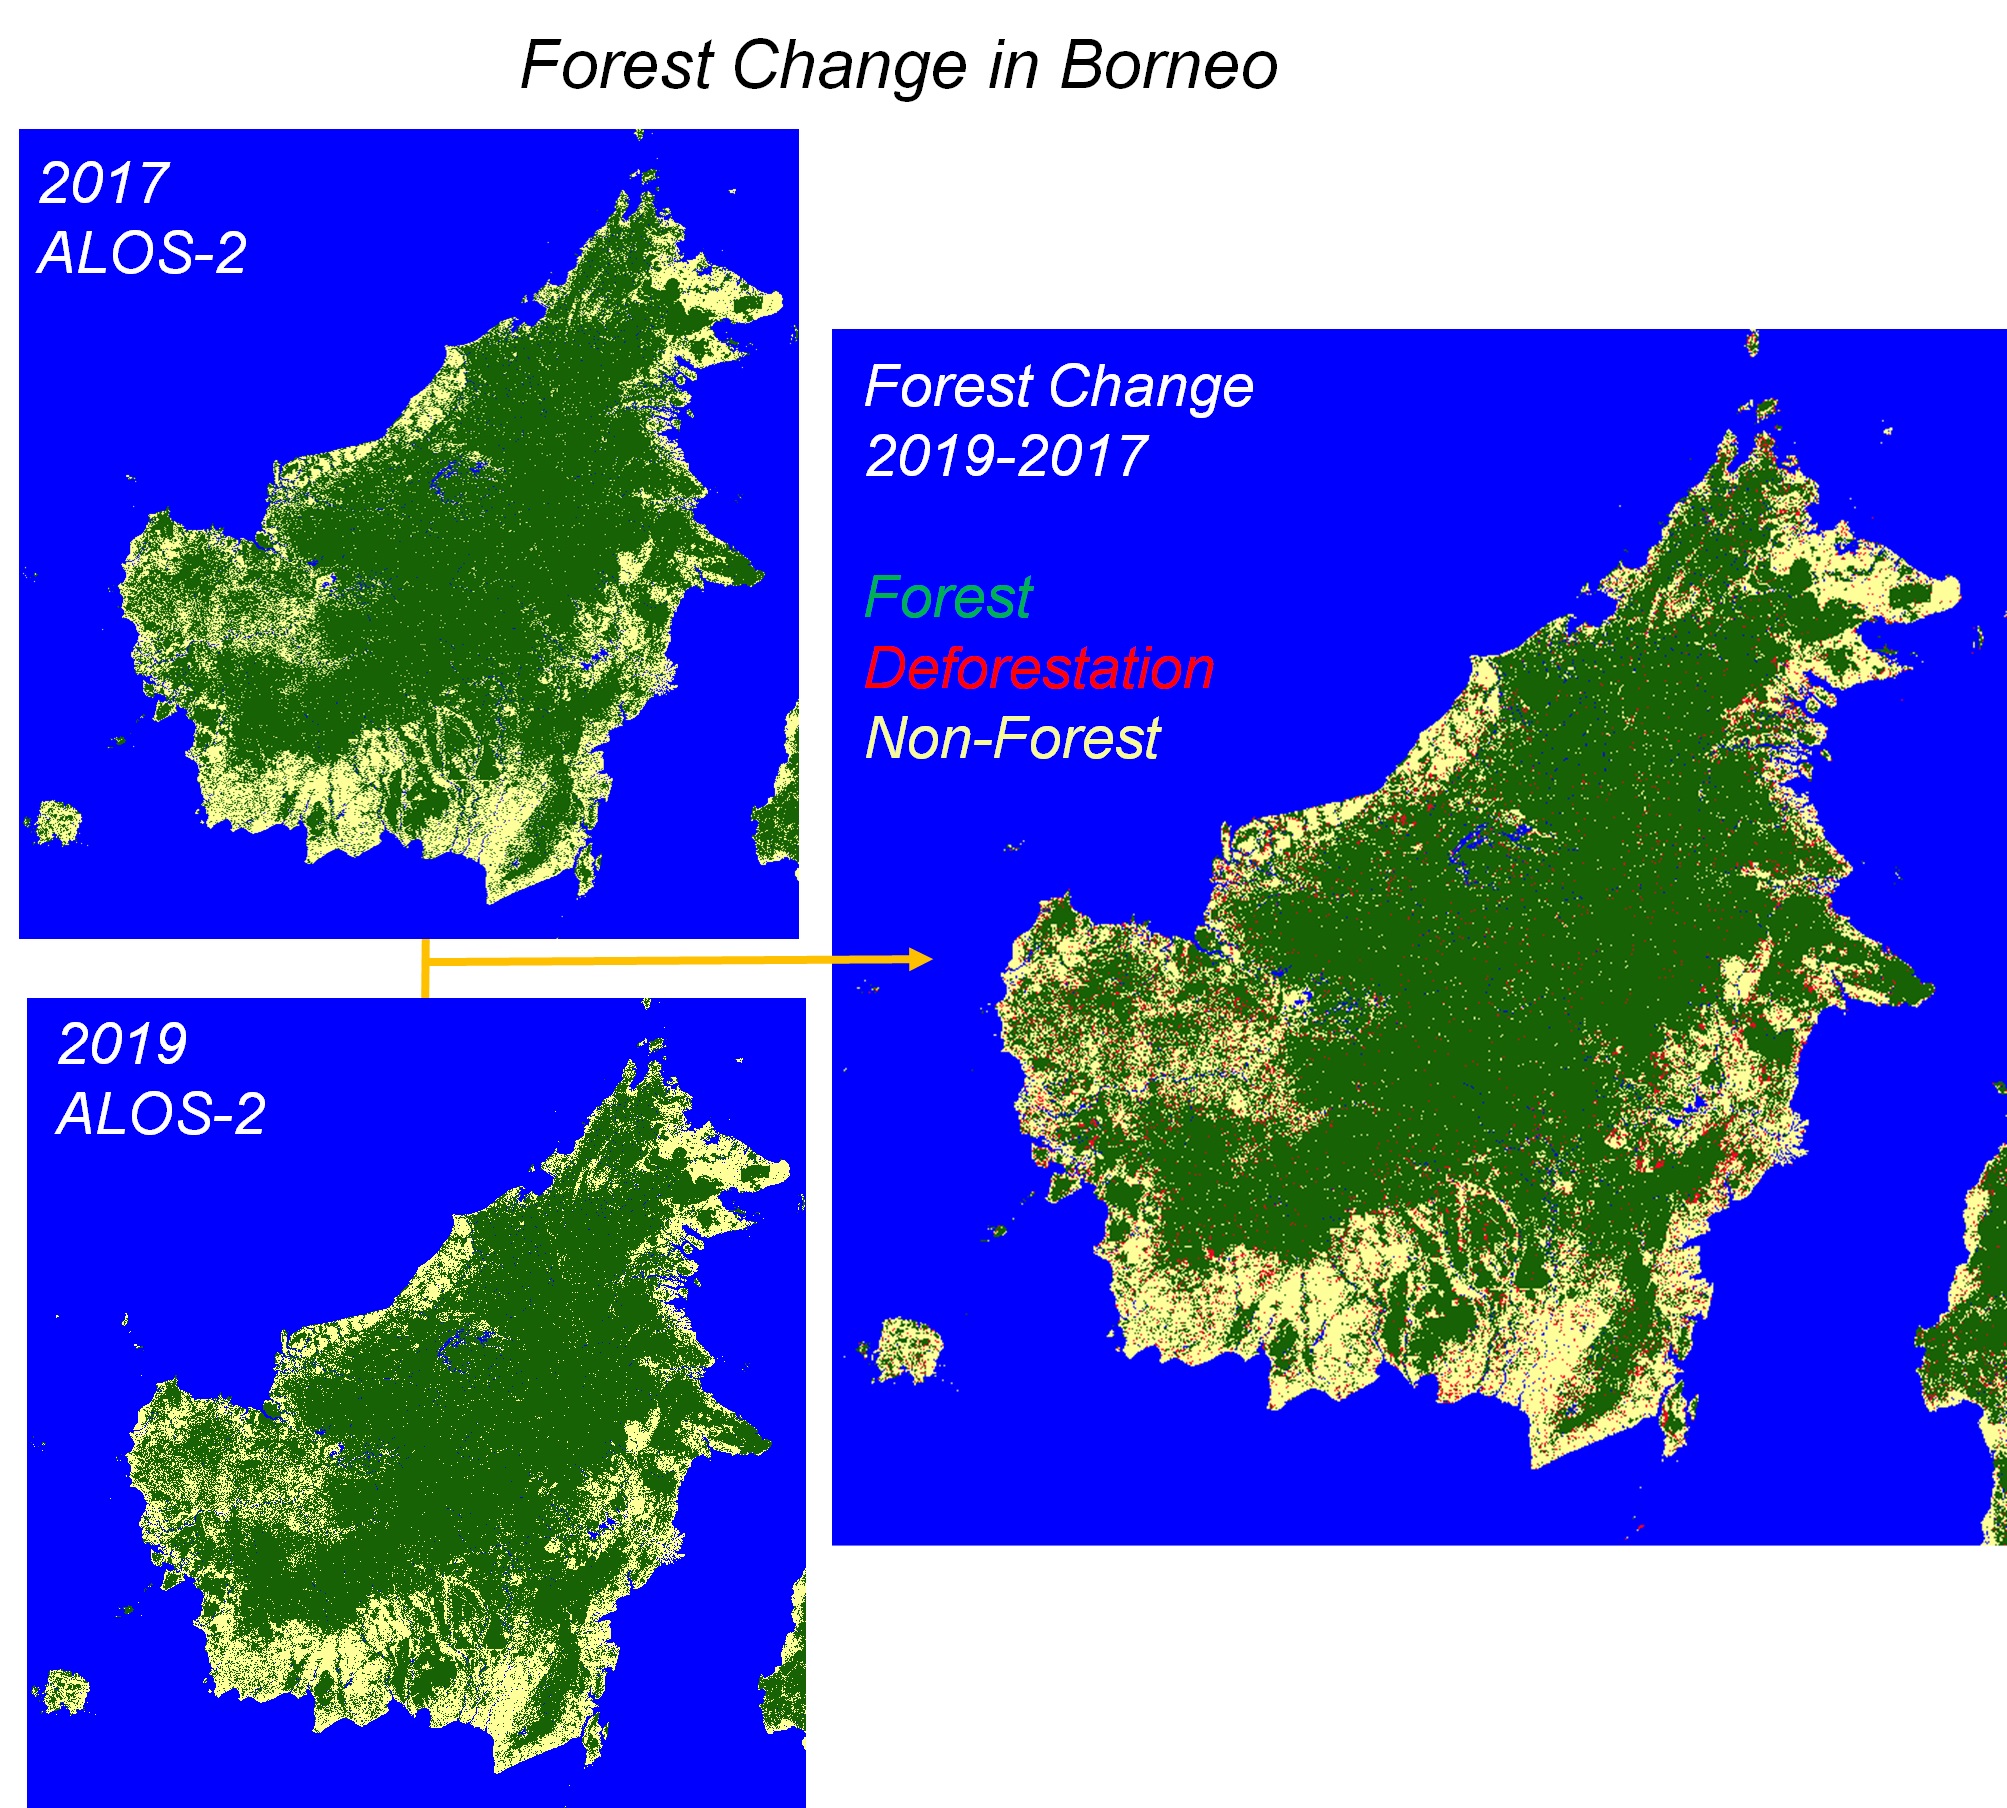 Figure 2: Loss of forest cover (red areas in the map) in Borneo island during 2017 to 2019.